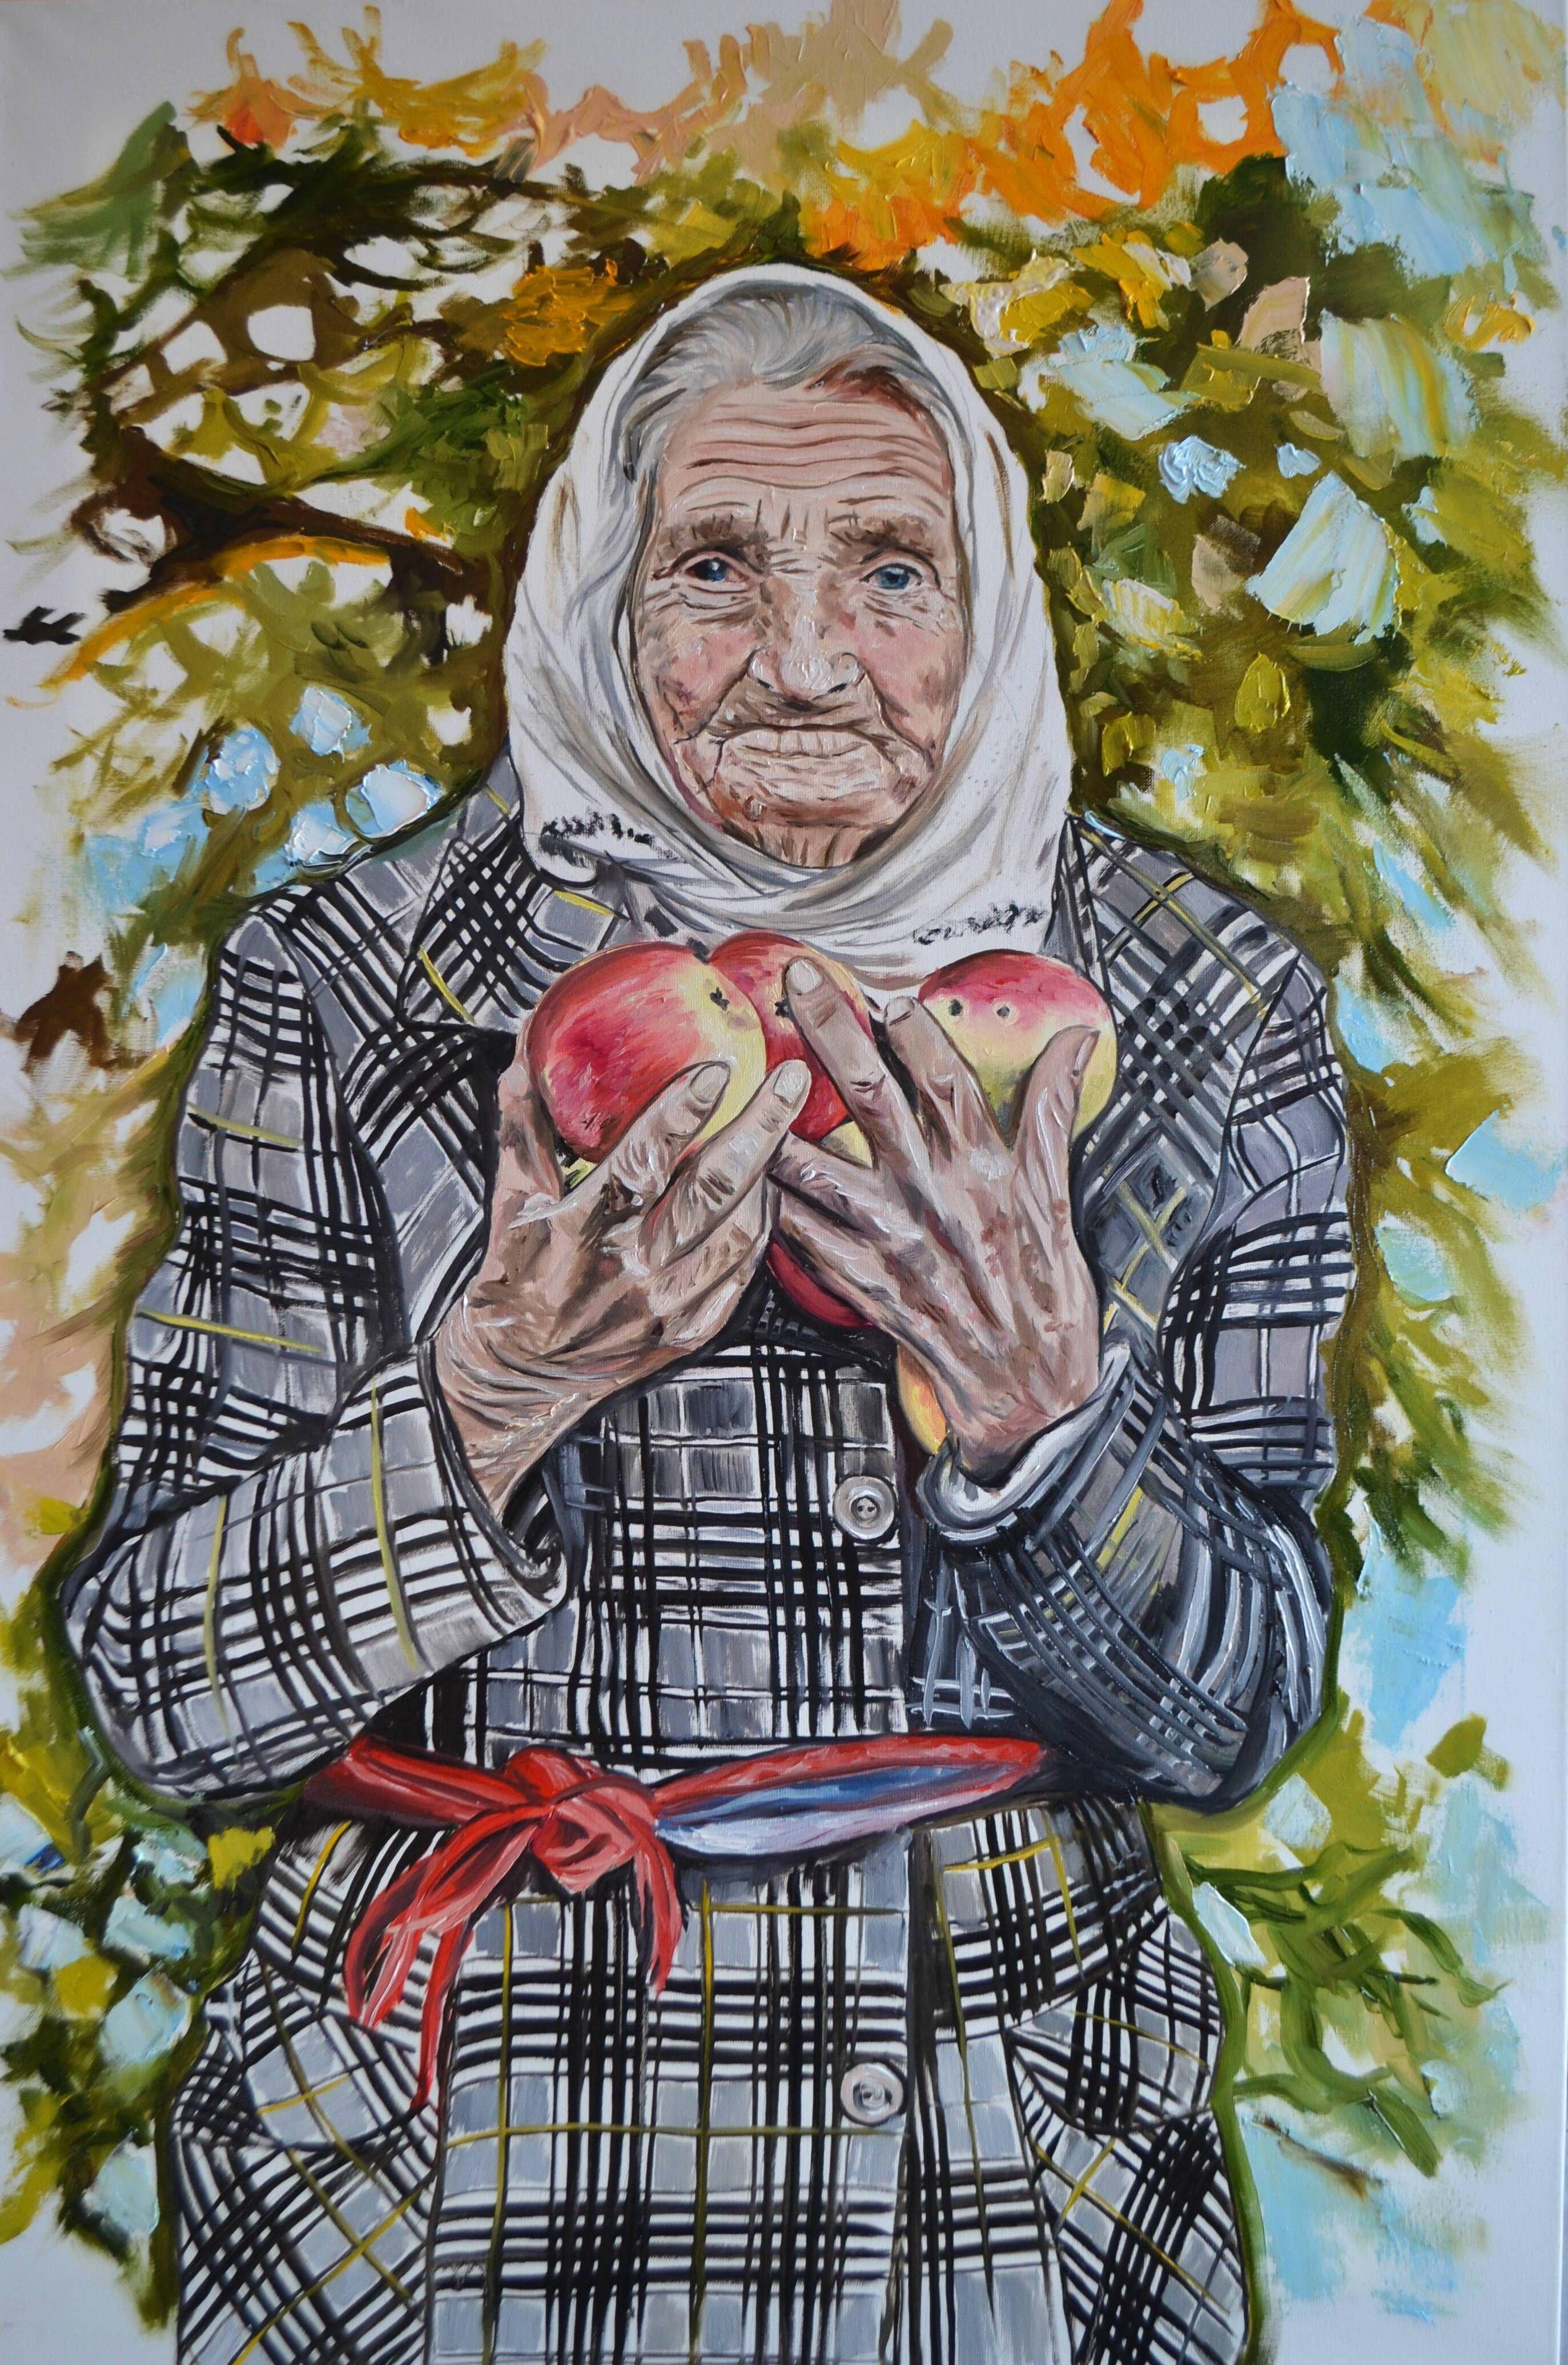 This old woman is a 92-year-old Ukrainian who meets Ukrainian soldiers who liberated her village from Russian invaders. She gives the soldiers what is abundant - apples from her garden. The photo of this woman with kind, penetrating and trusting